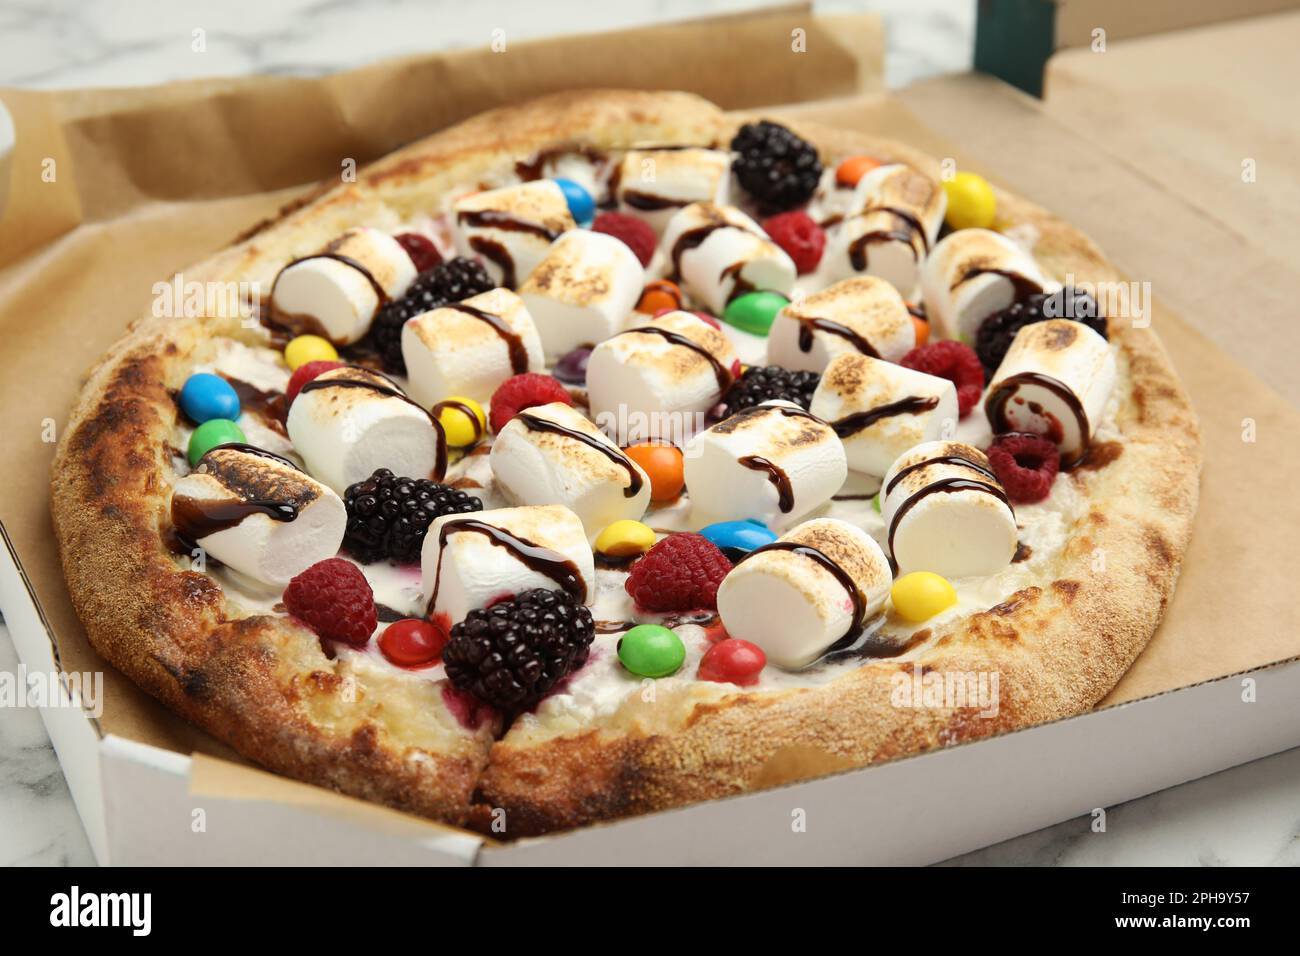 https://c8.alamy.com/comp/2PH9Y57/tasty-sweet-pizza-with-berries-marshmallows-and-candies-in-cardboard-box-on-table-closeup-2PH9Y57.jpg